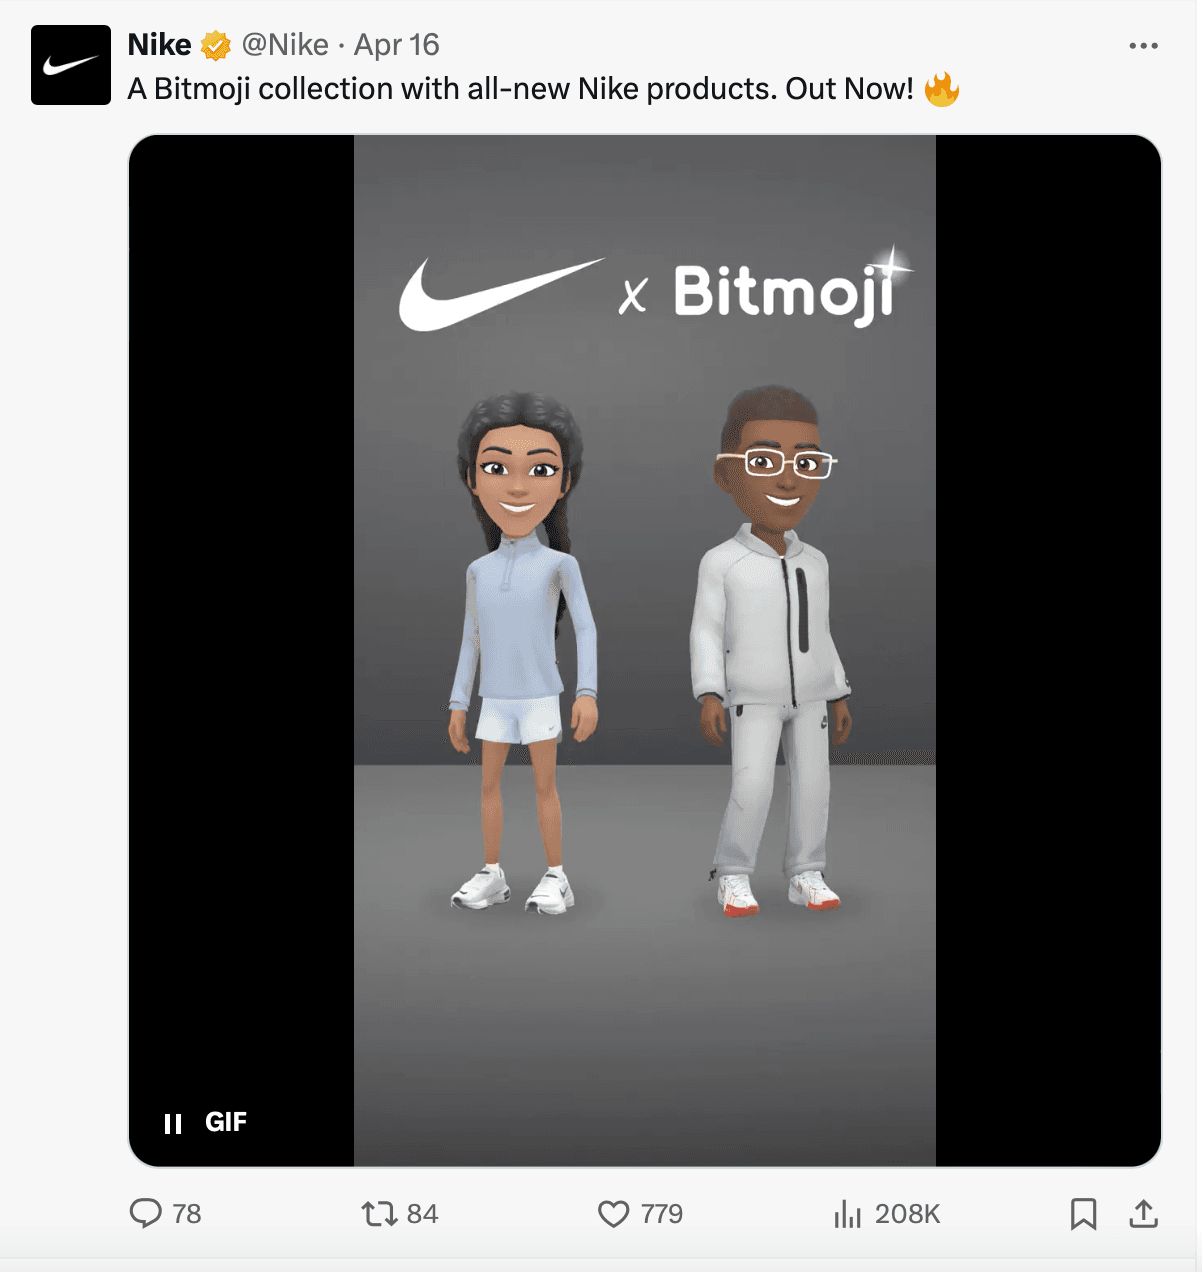 Nike engaging trends to get more followers on Tweeter